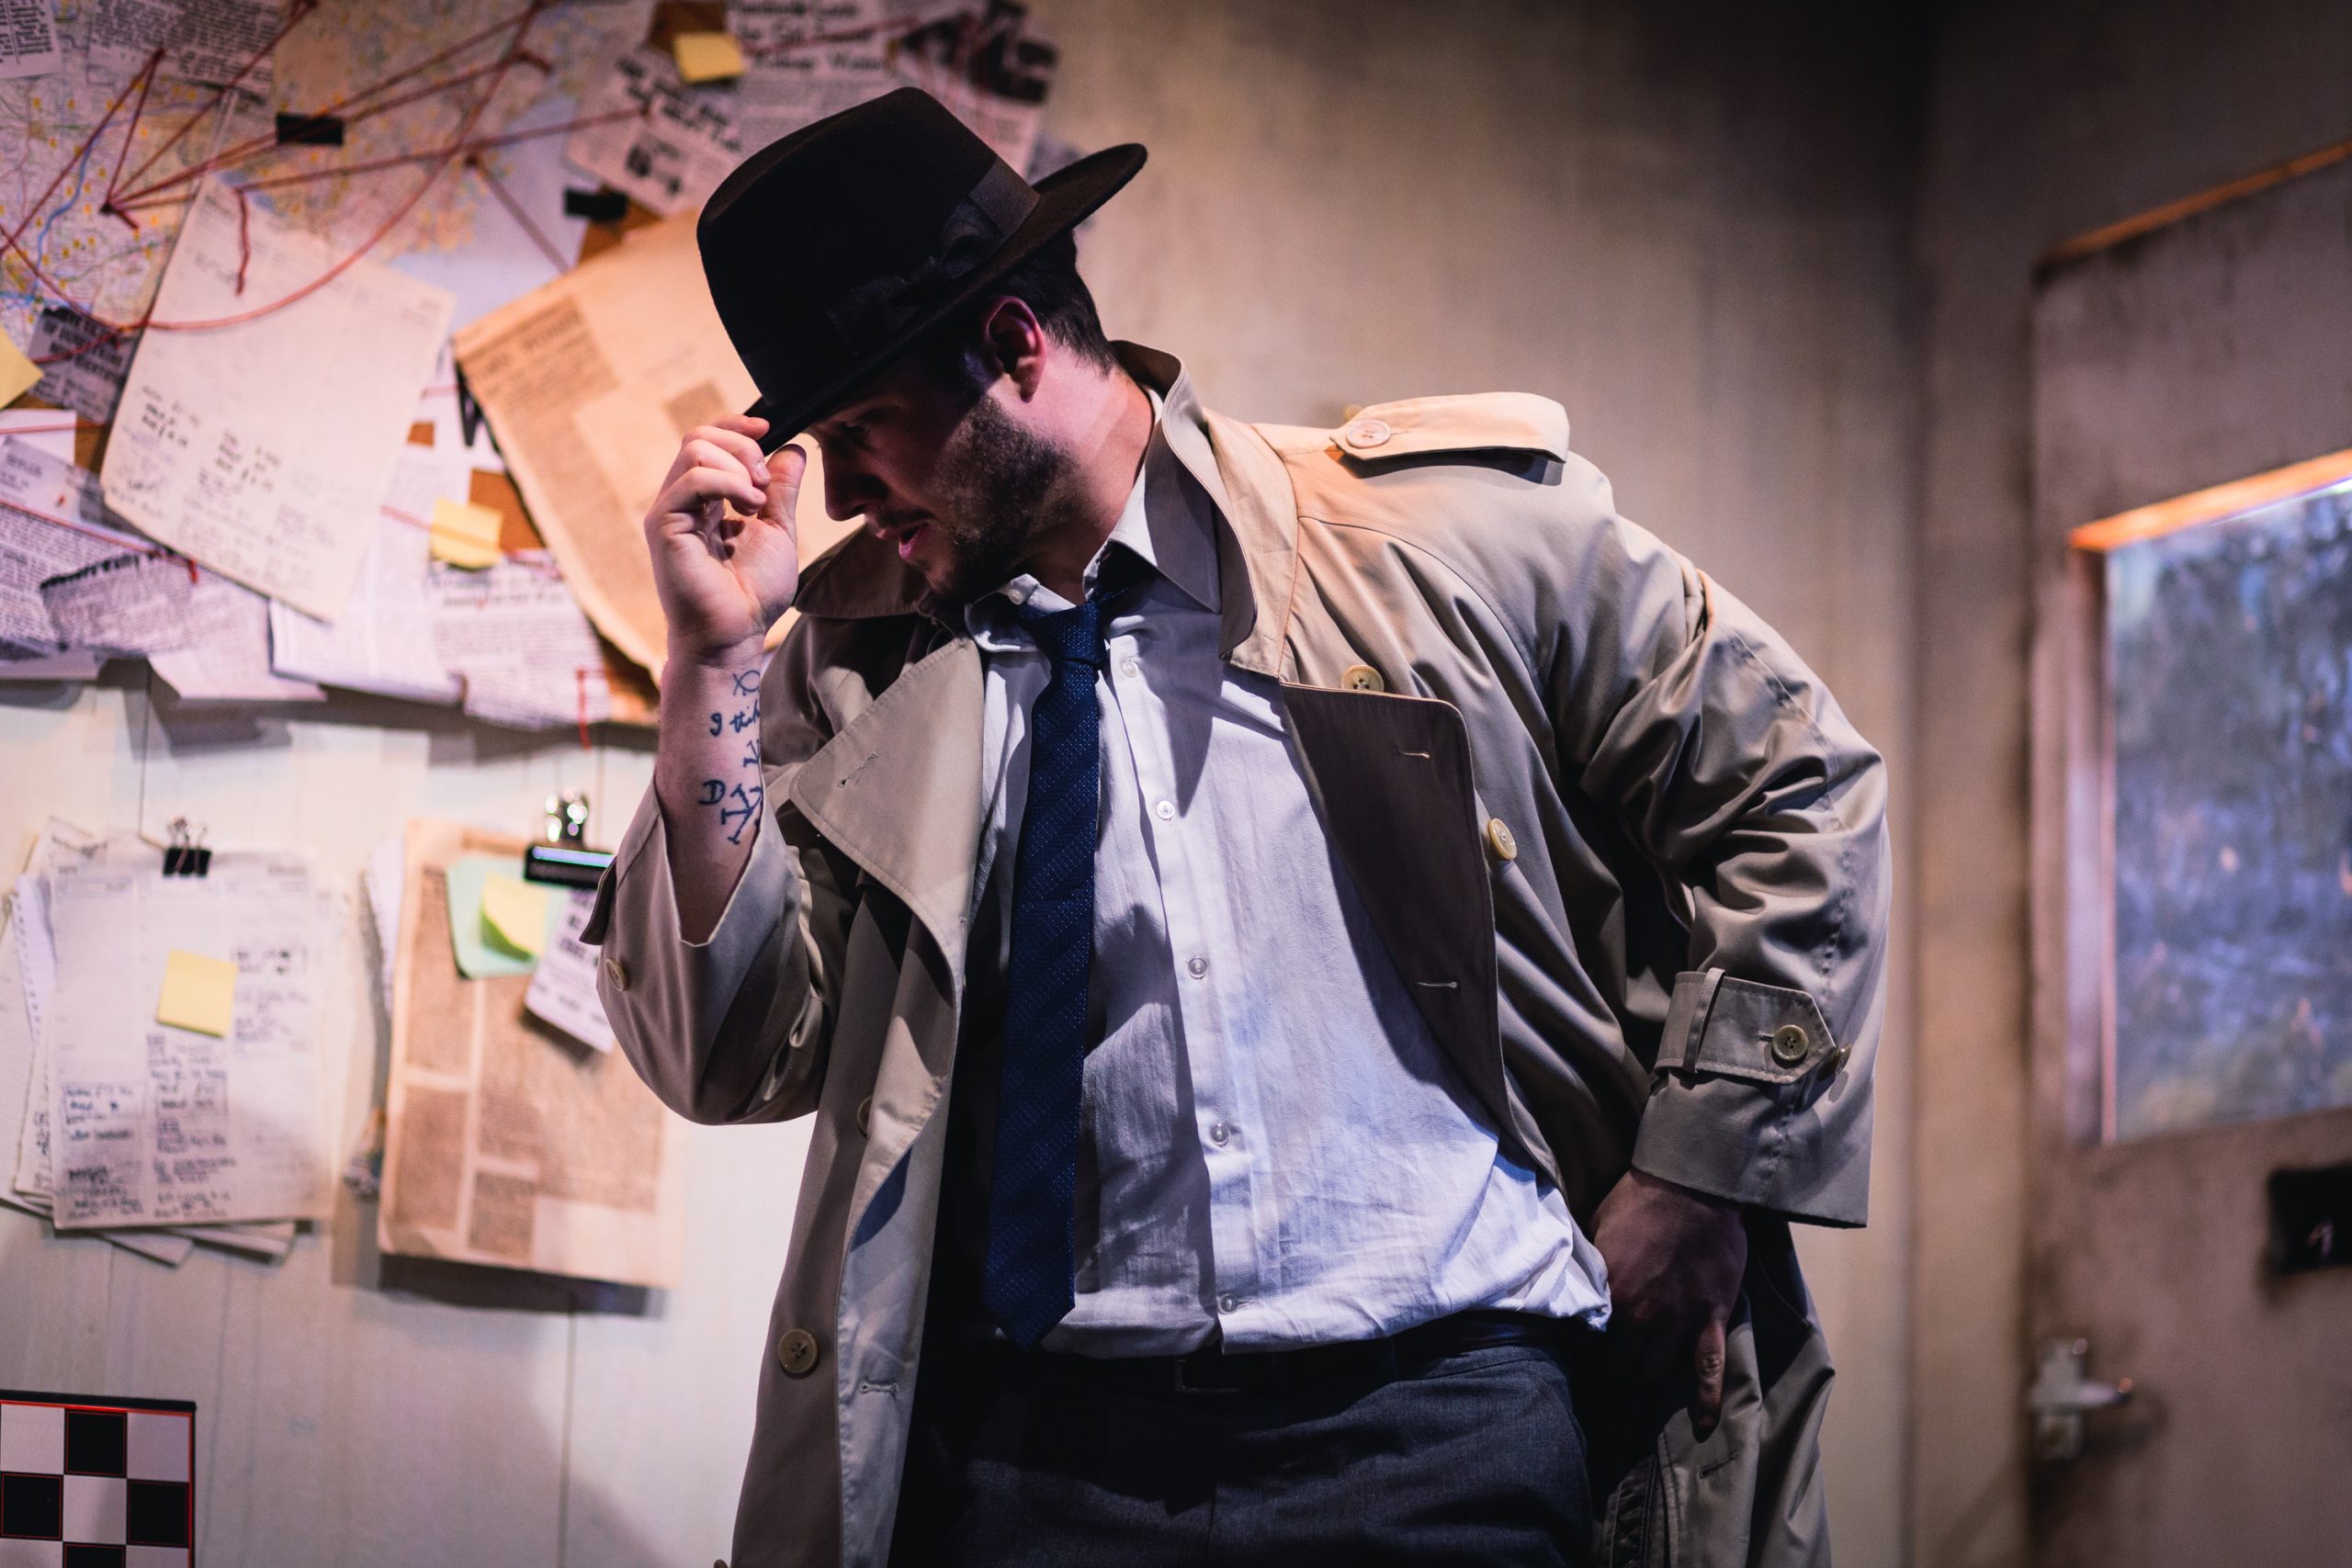 A dancer performs on a set which looks like a classic detective's office with papers on the wall and red string linking different bits of evidence. The dancer is wearing detective clothes - a black hat, long brown coat and shirt and tie